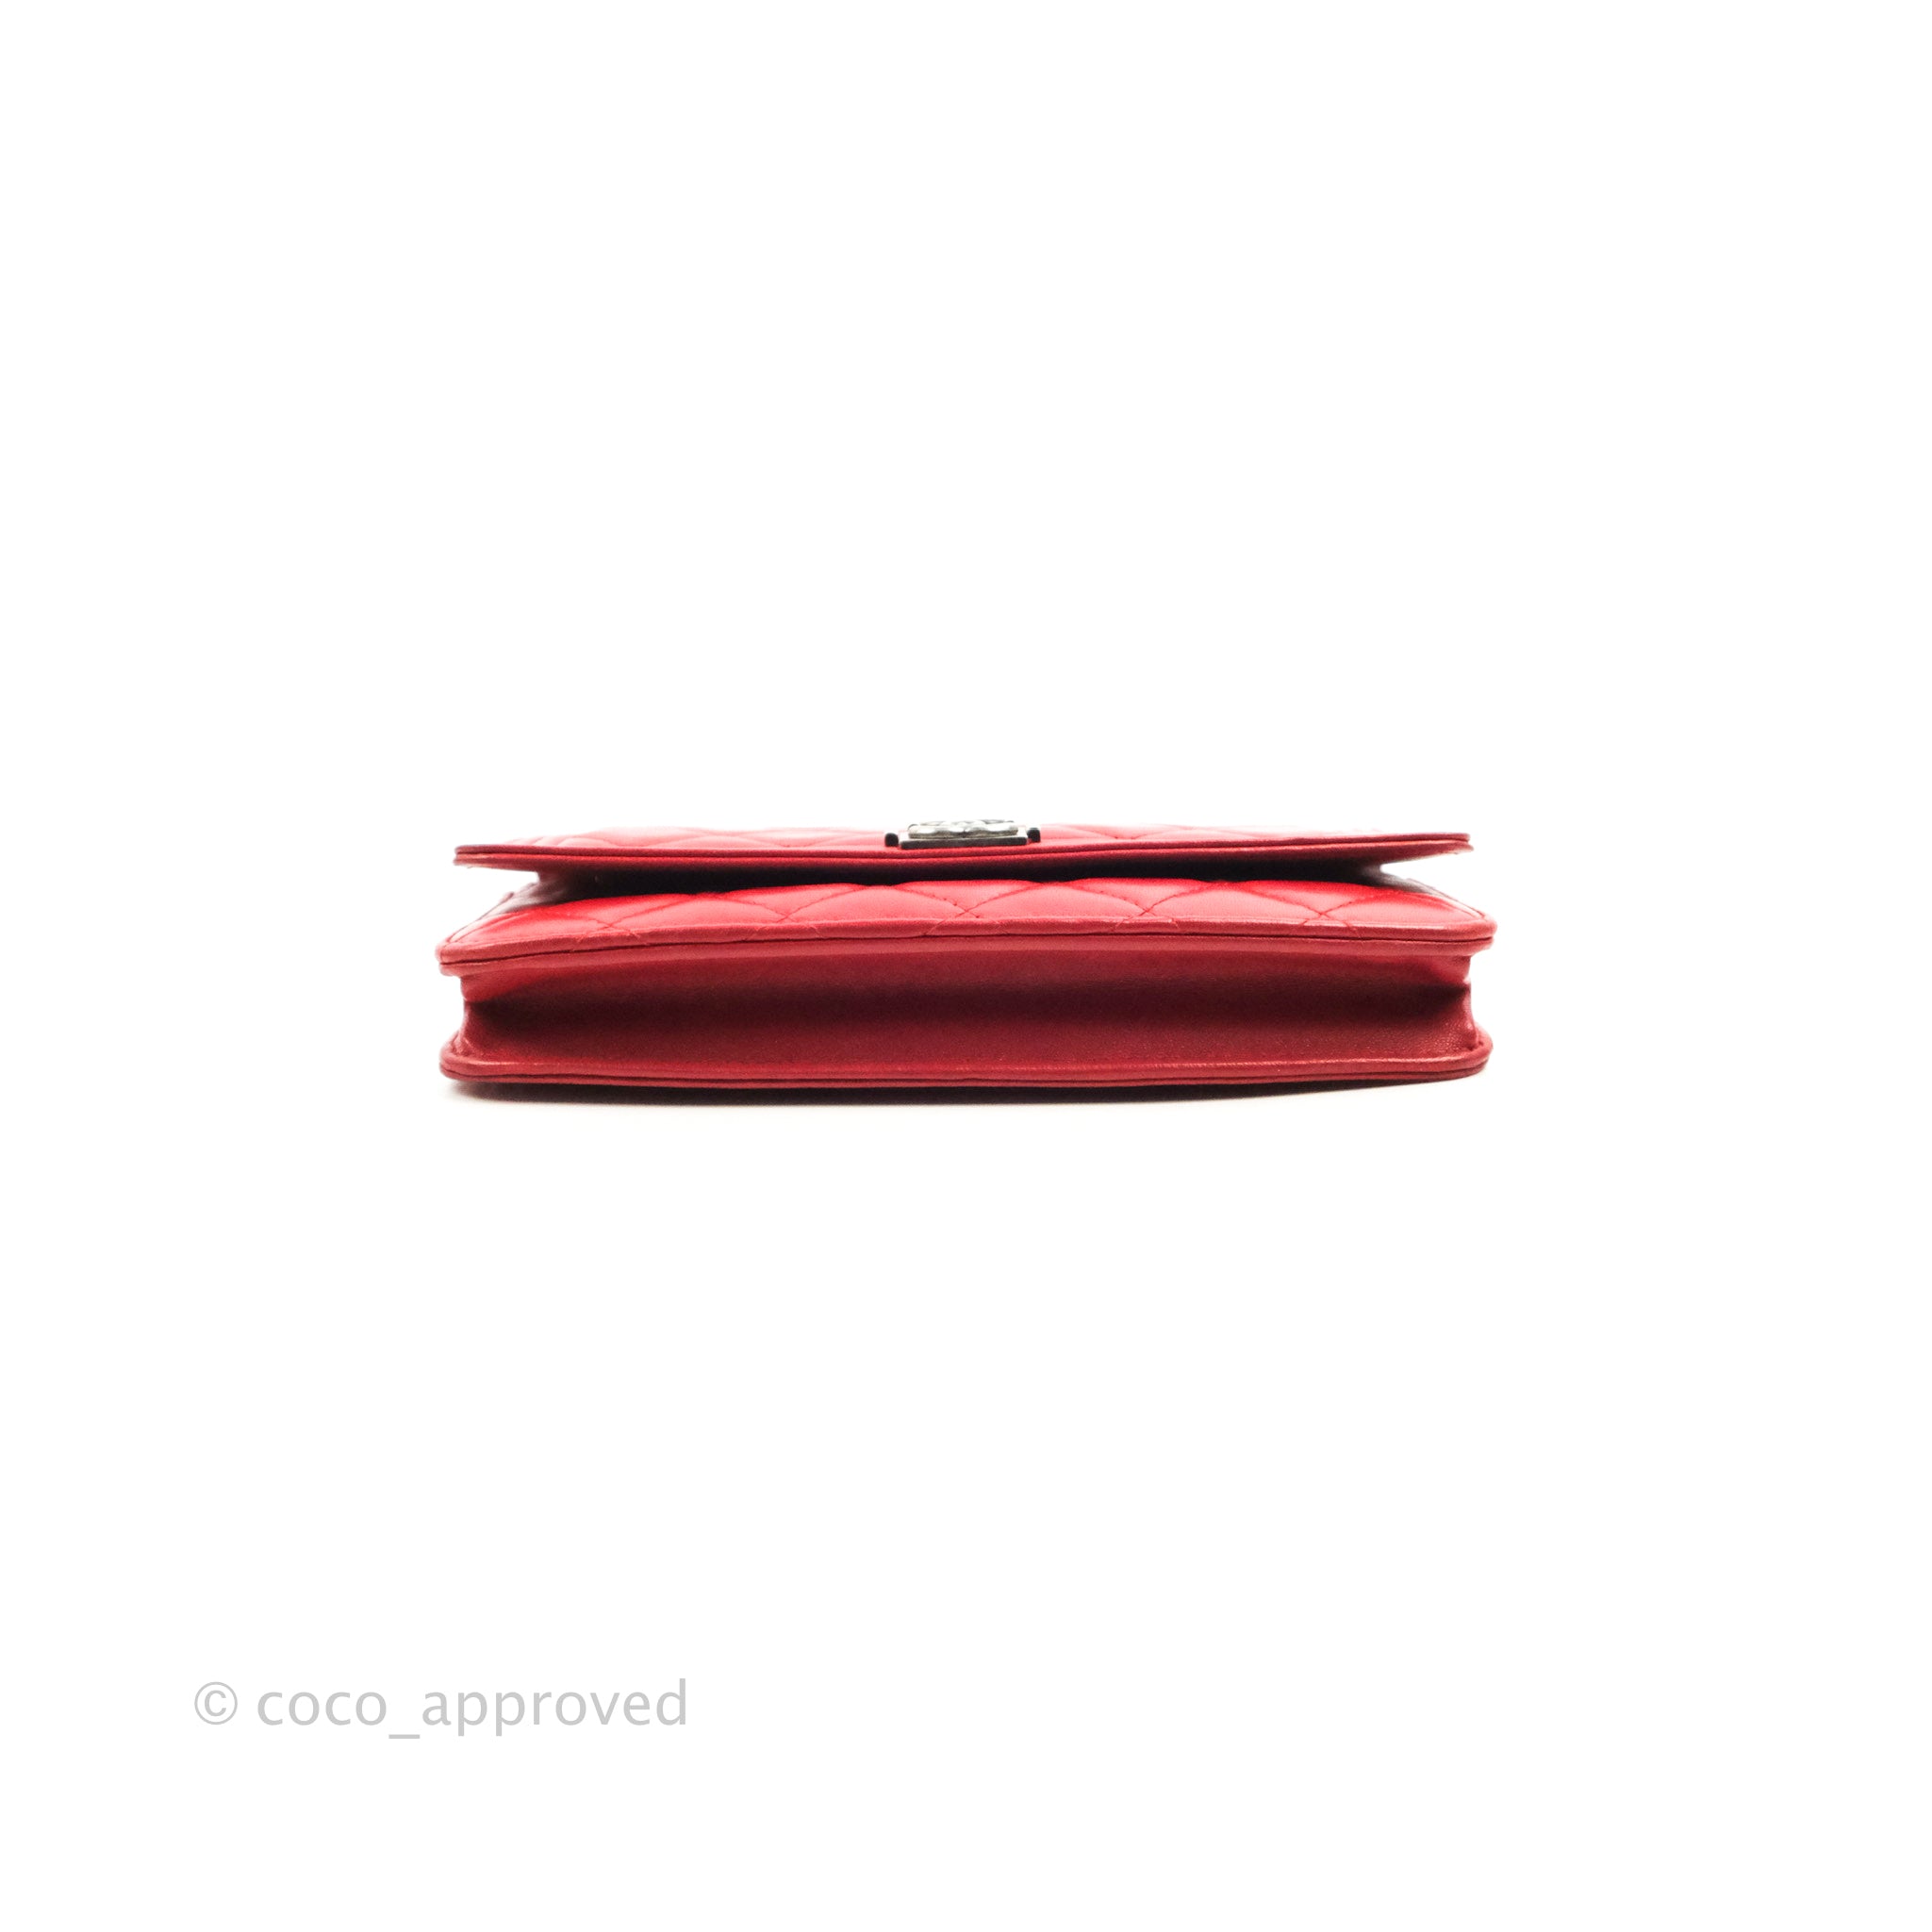 Chanel Red Chevron Leather Wallet On Chain